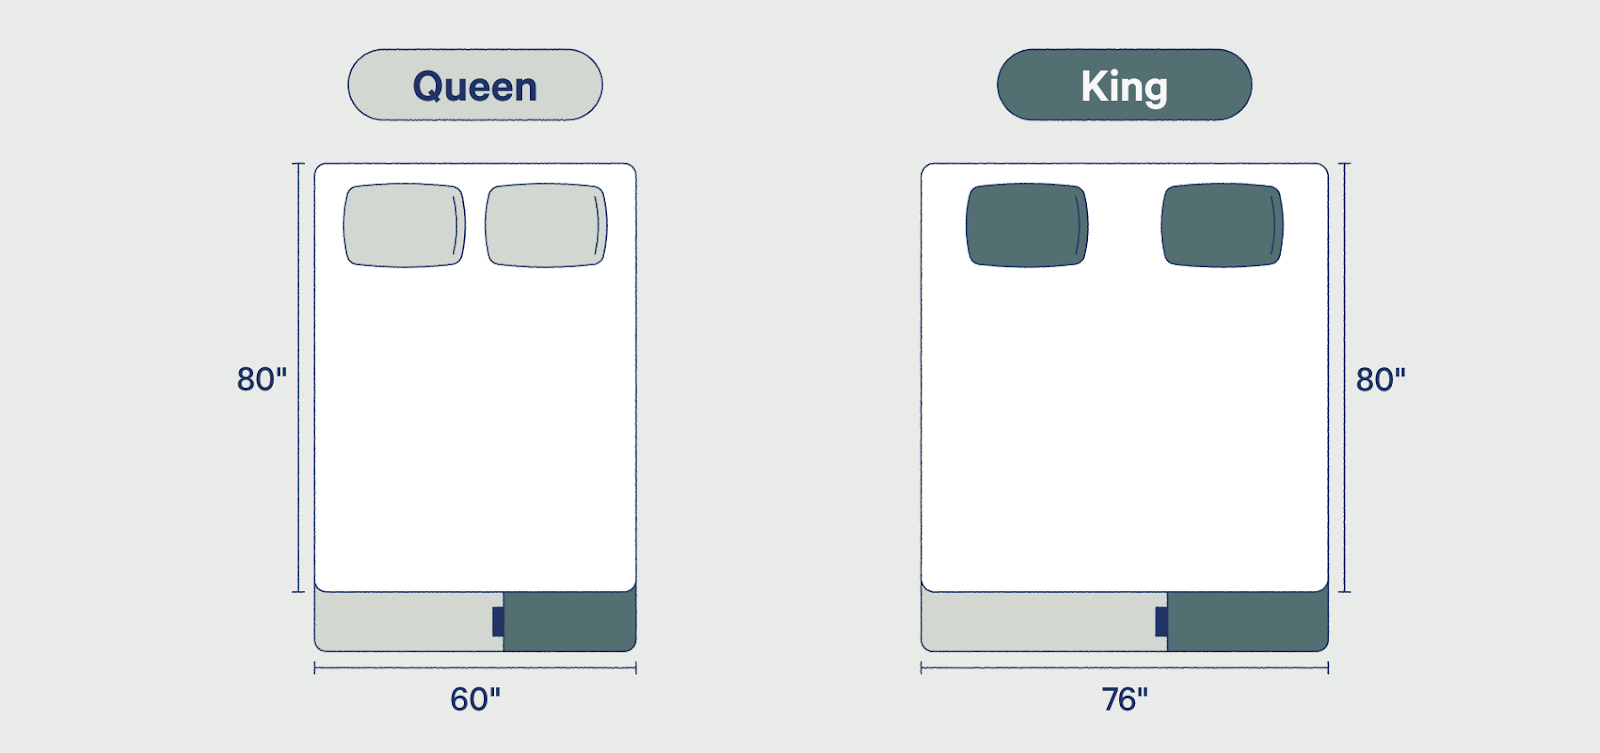 King Vs Queen Bed Size And Comparison, Standard King Size Bed Dimensions